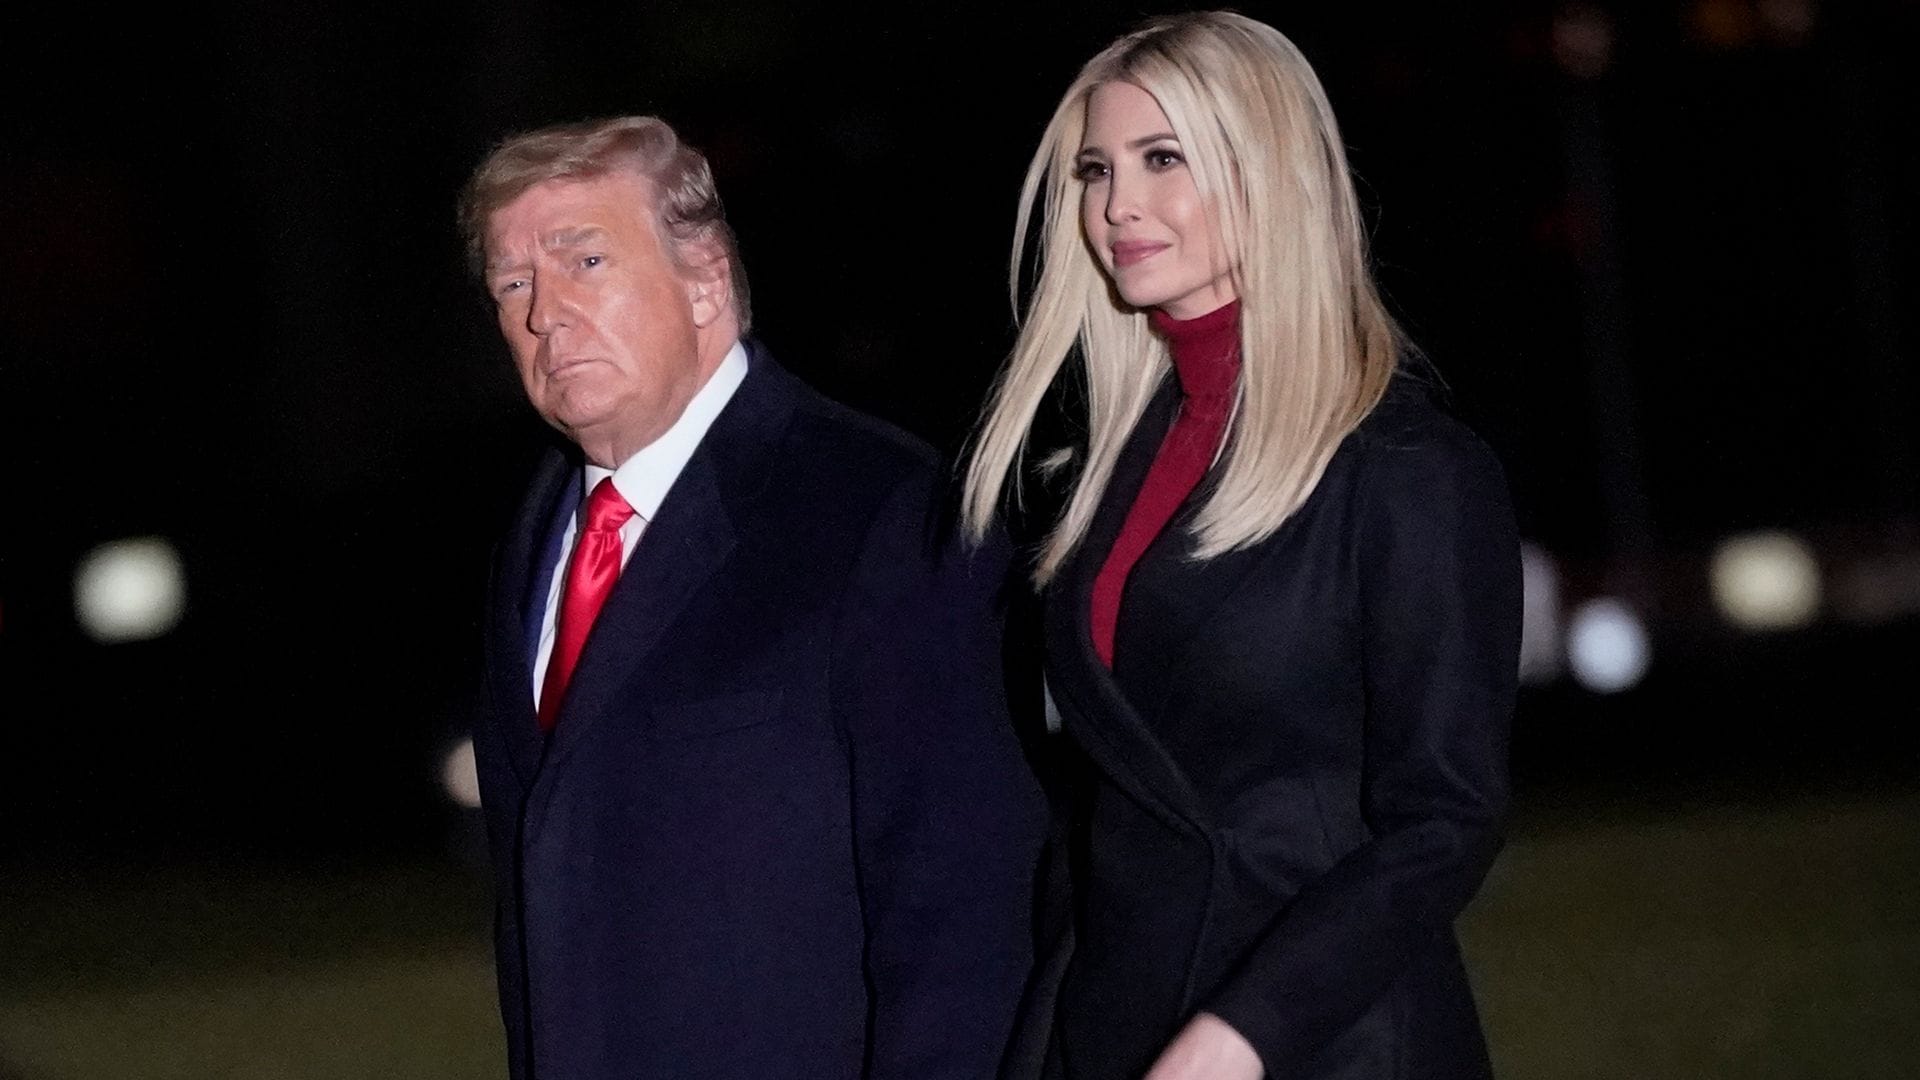 Ivanka Trump met with dad Donald Trump after the assassination attempt on him: Details